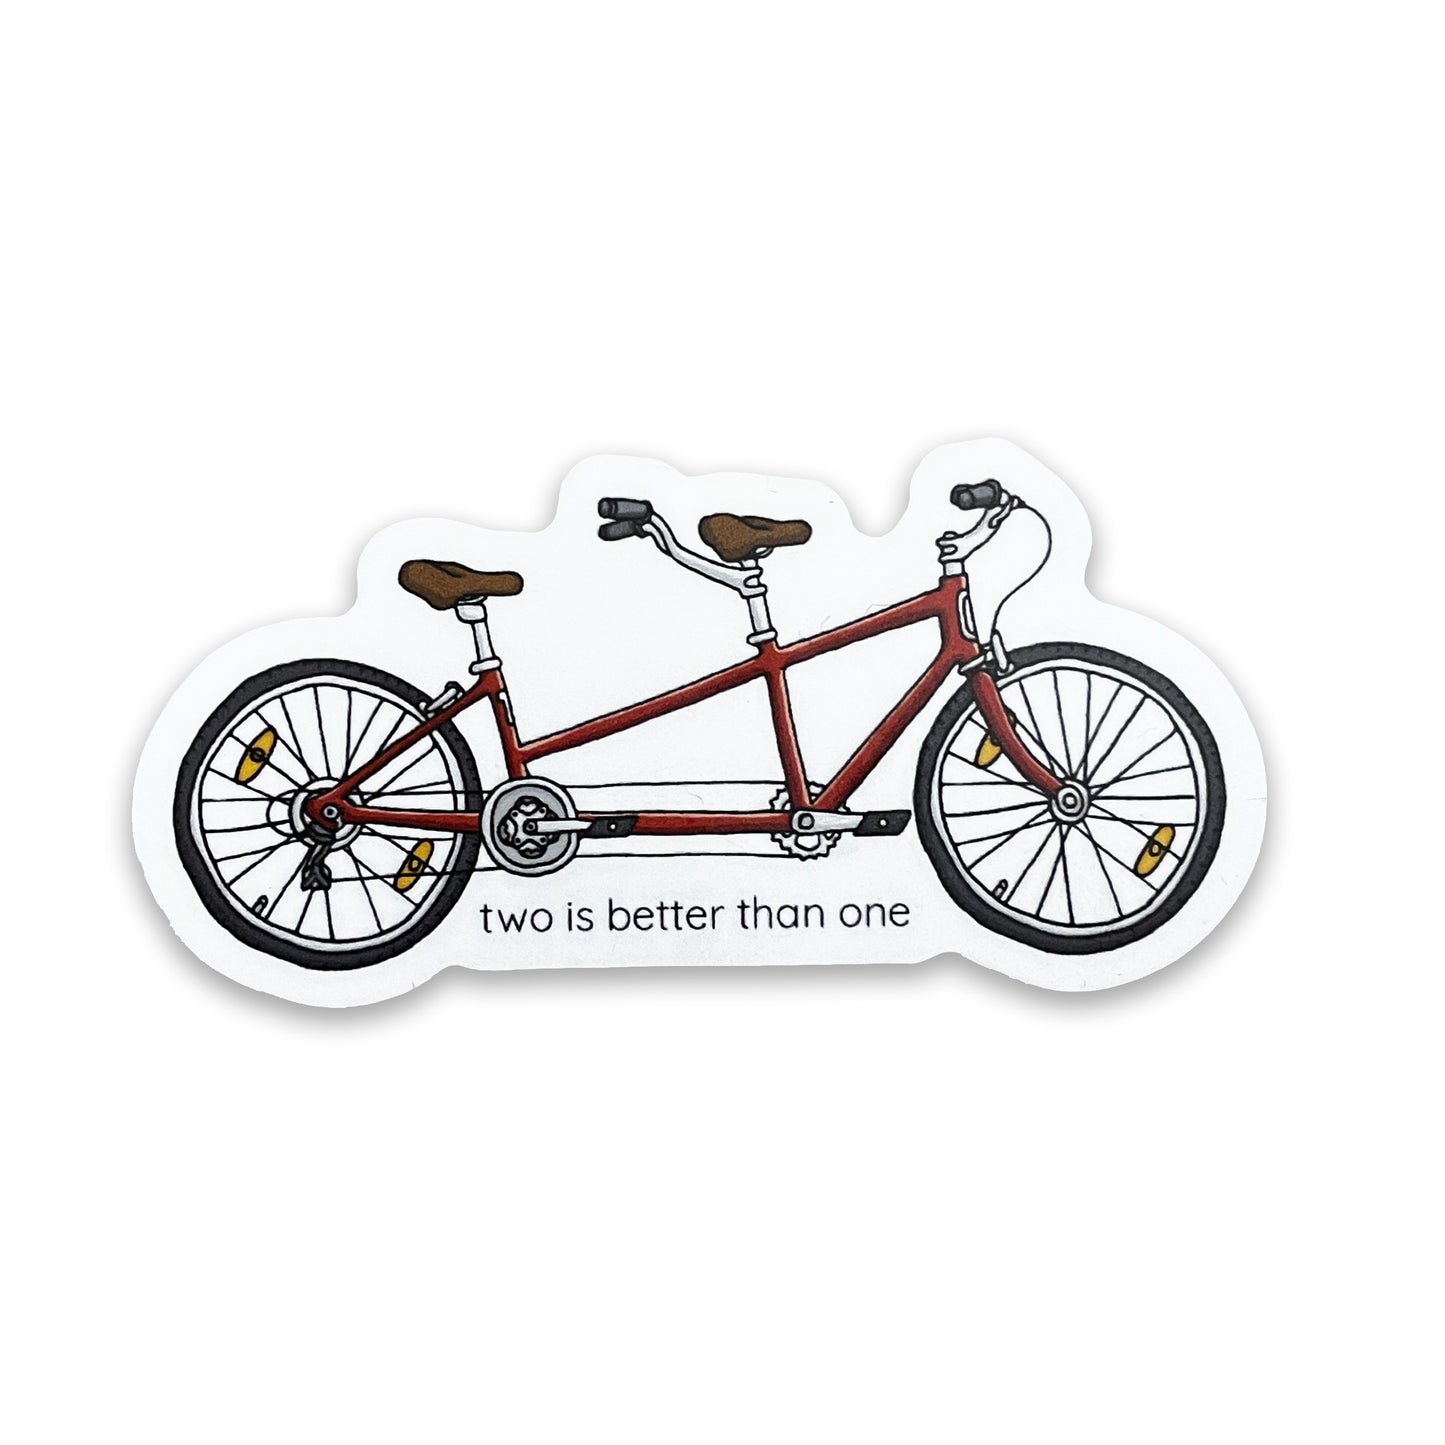 Red tandem bike sticker with punny saying, two is better than one on the front. Durable enough for cyclist, mountain biker, gravel bike, zwift, peleton. Vinyl sticker for hydroflask, nalgene, yeti, laptop, window